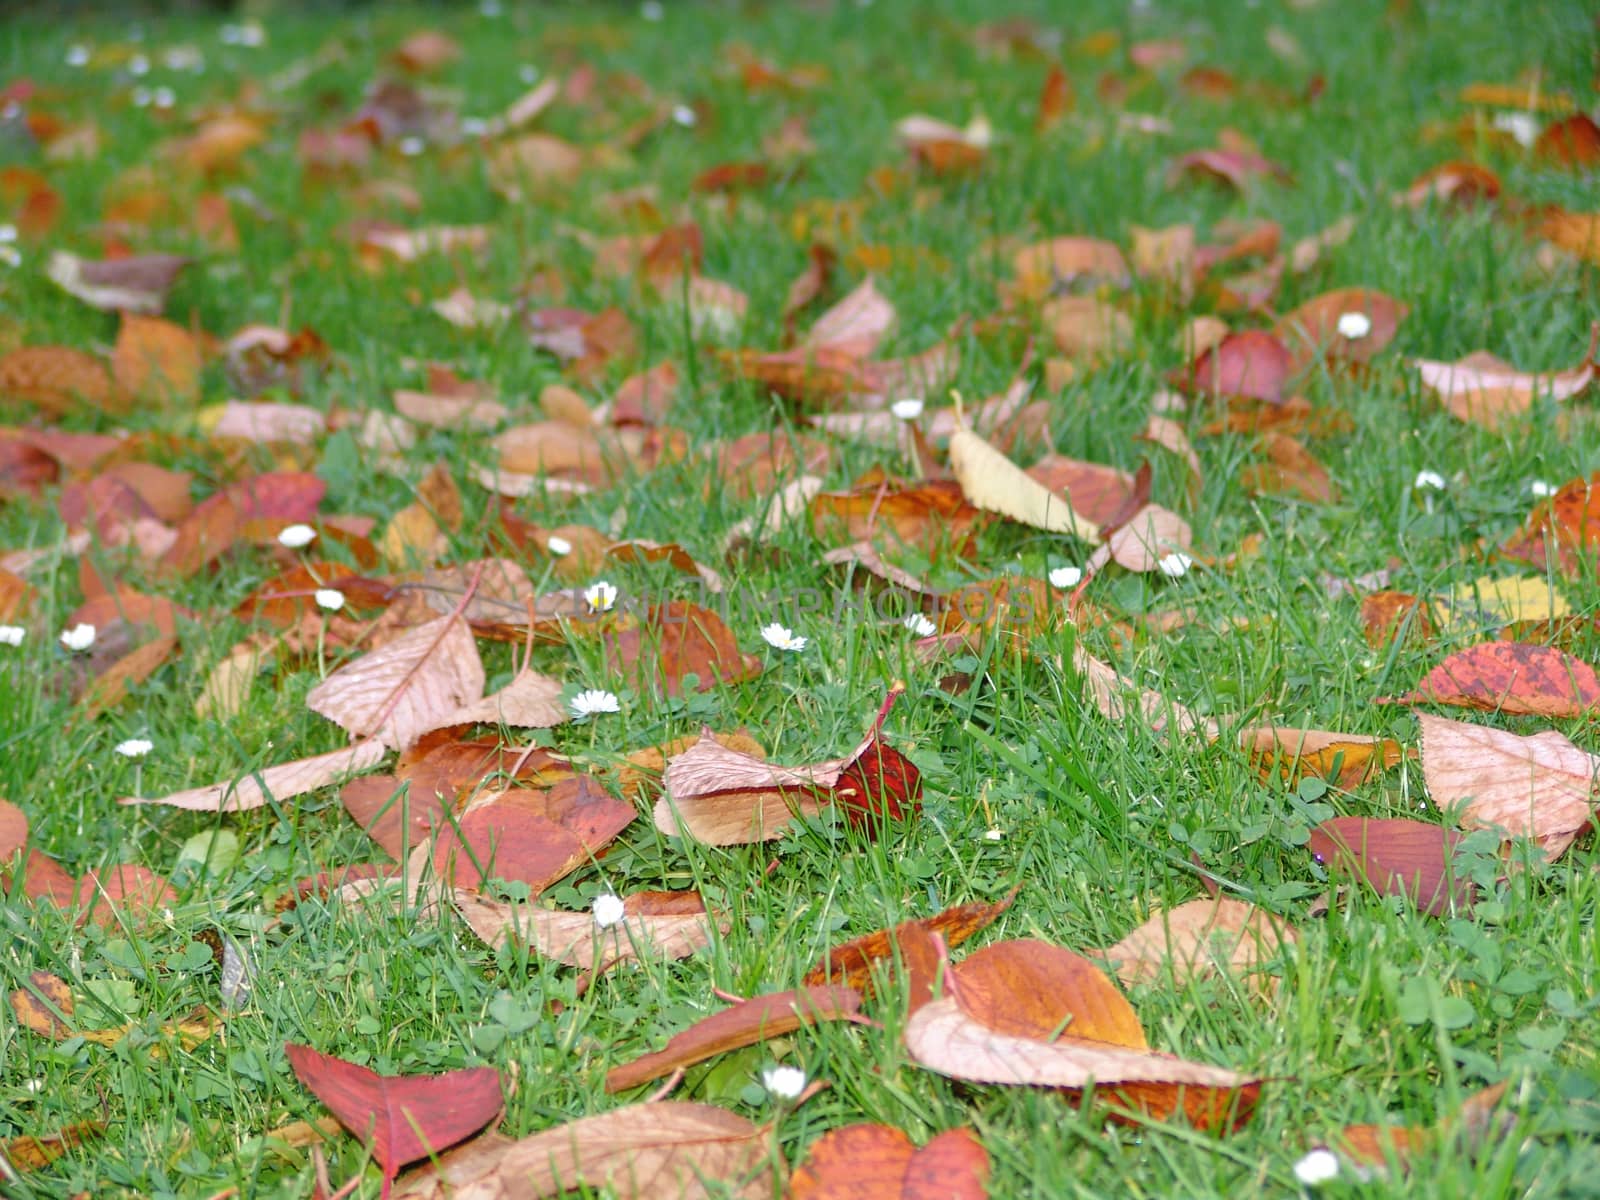 Autumn leaves on grass. by elena_vz